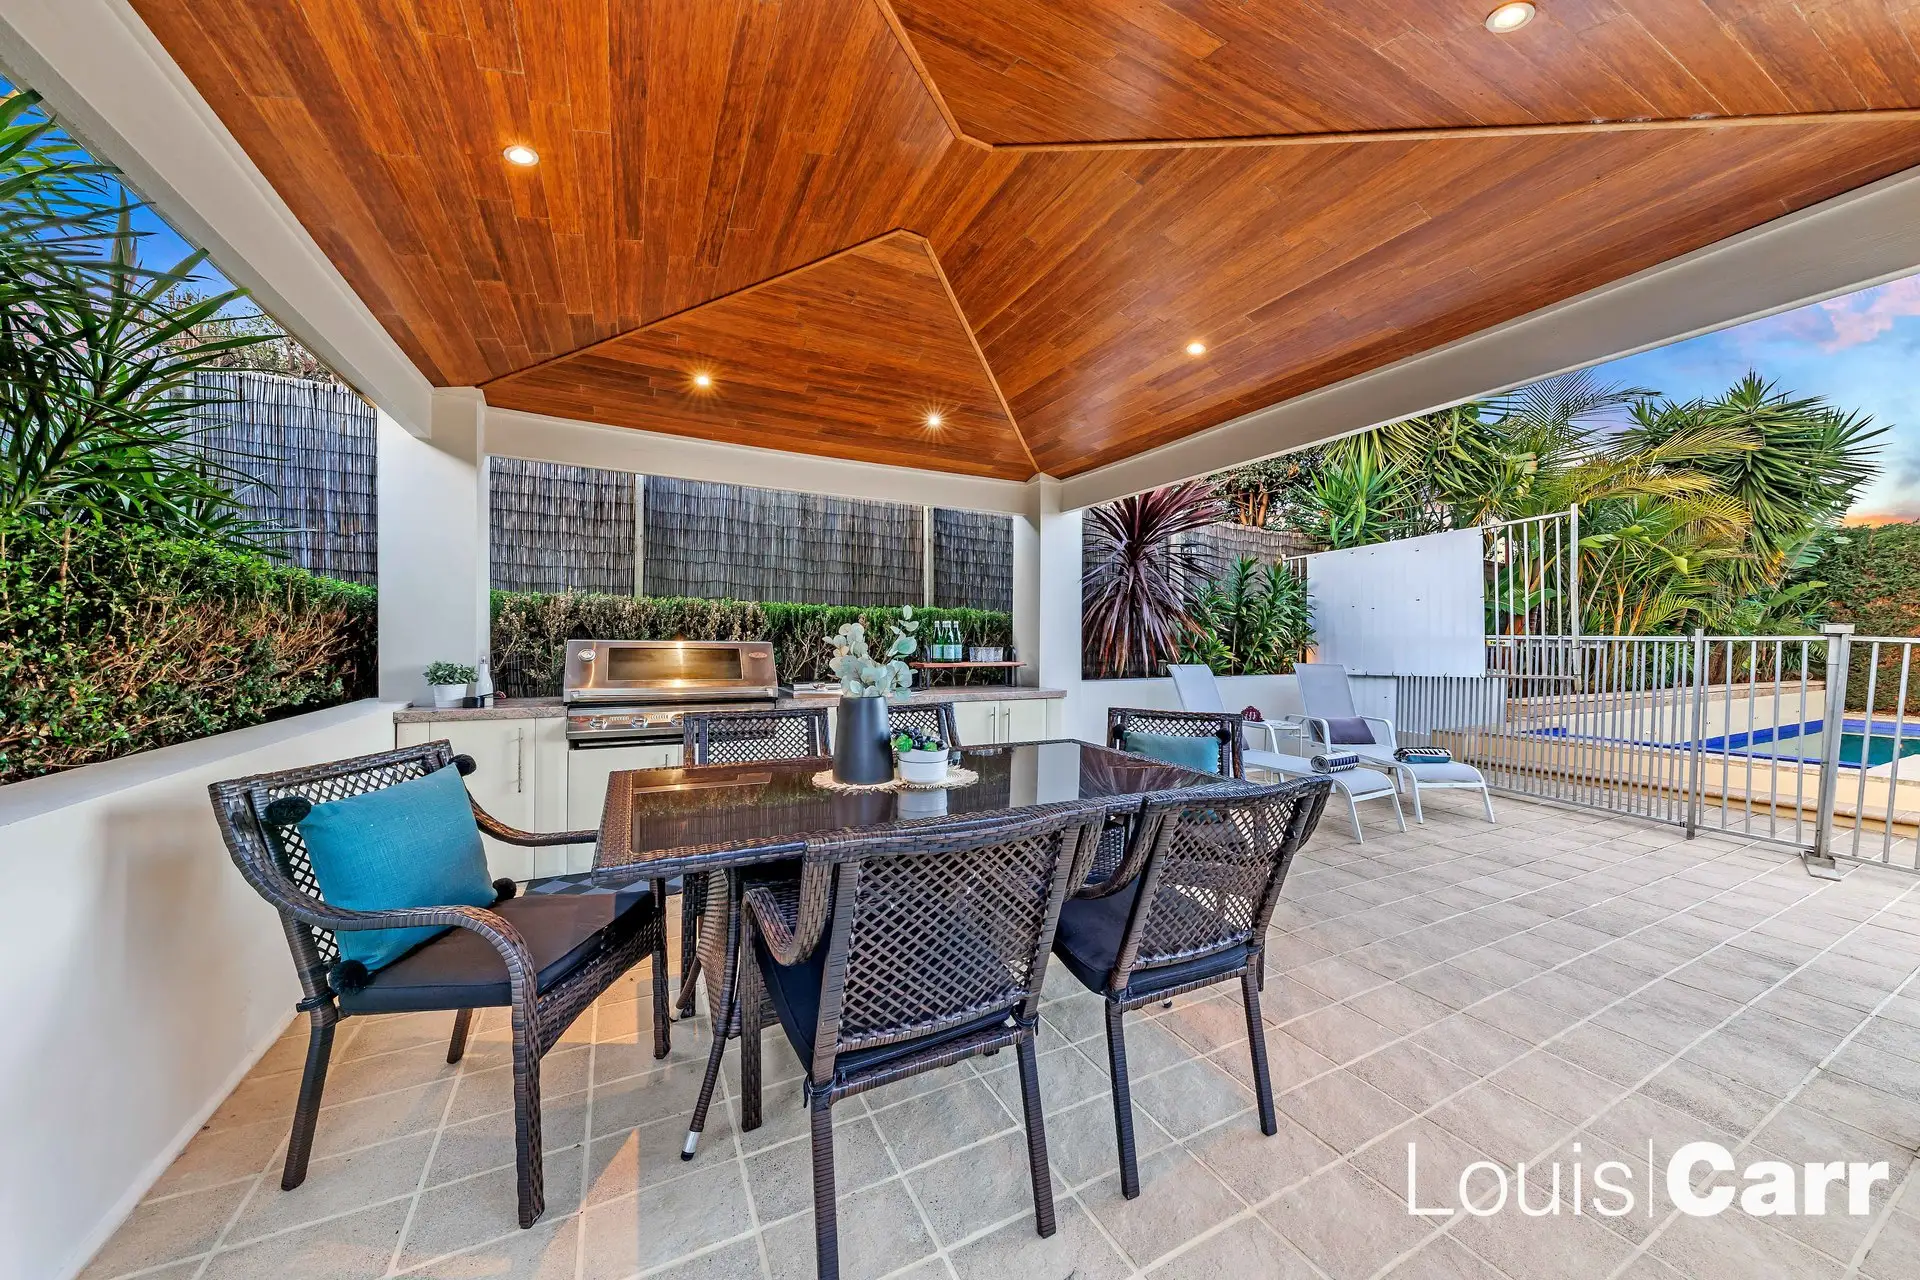 Photo #5: 66 Yaringa Road, Castle Hill - Sold by Louis Carr Real Estate